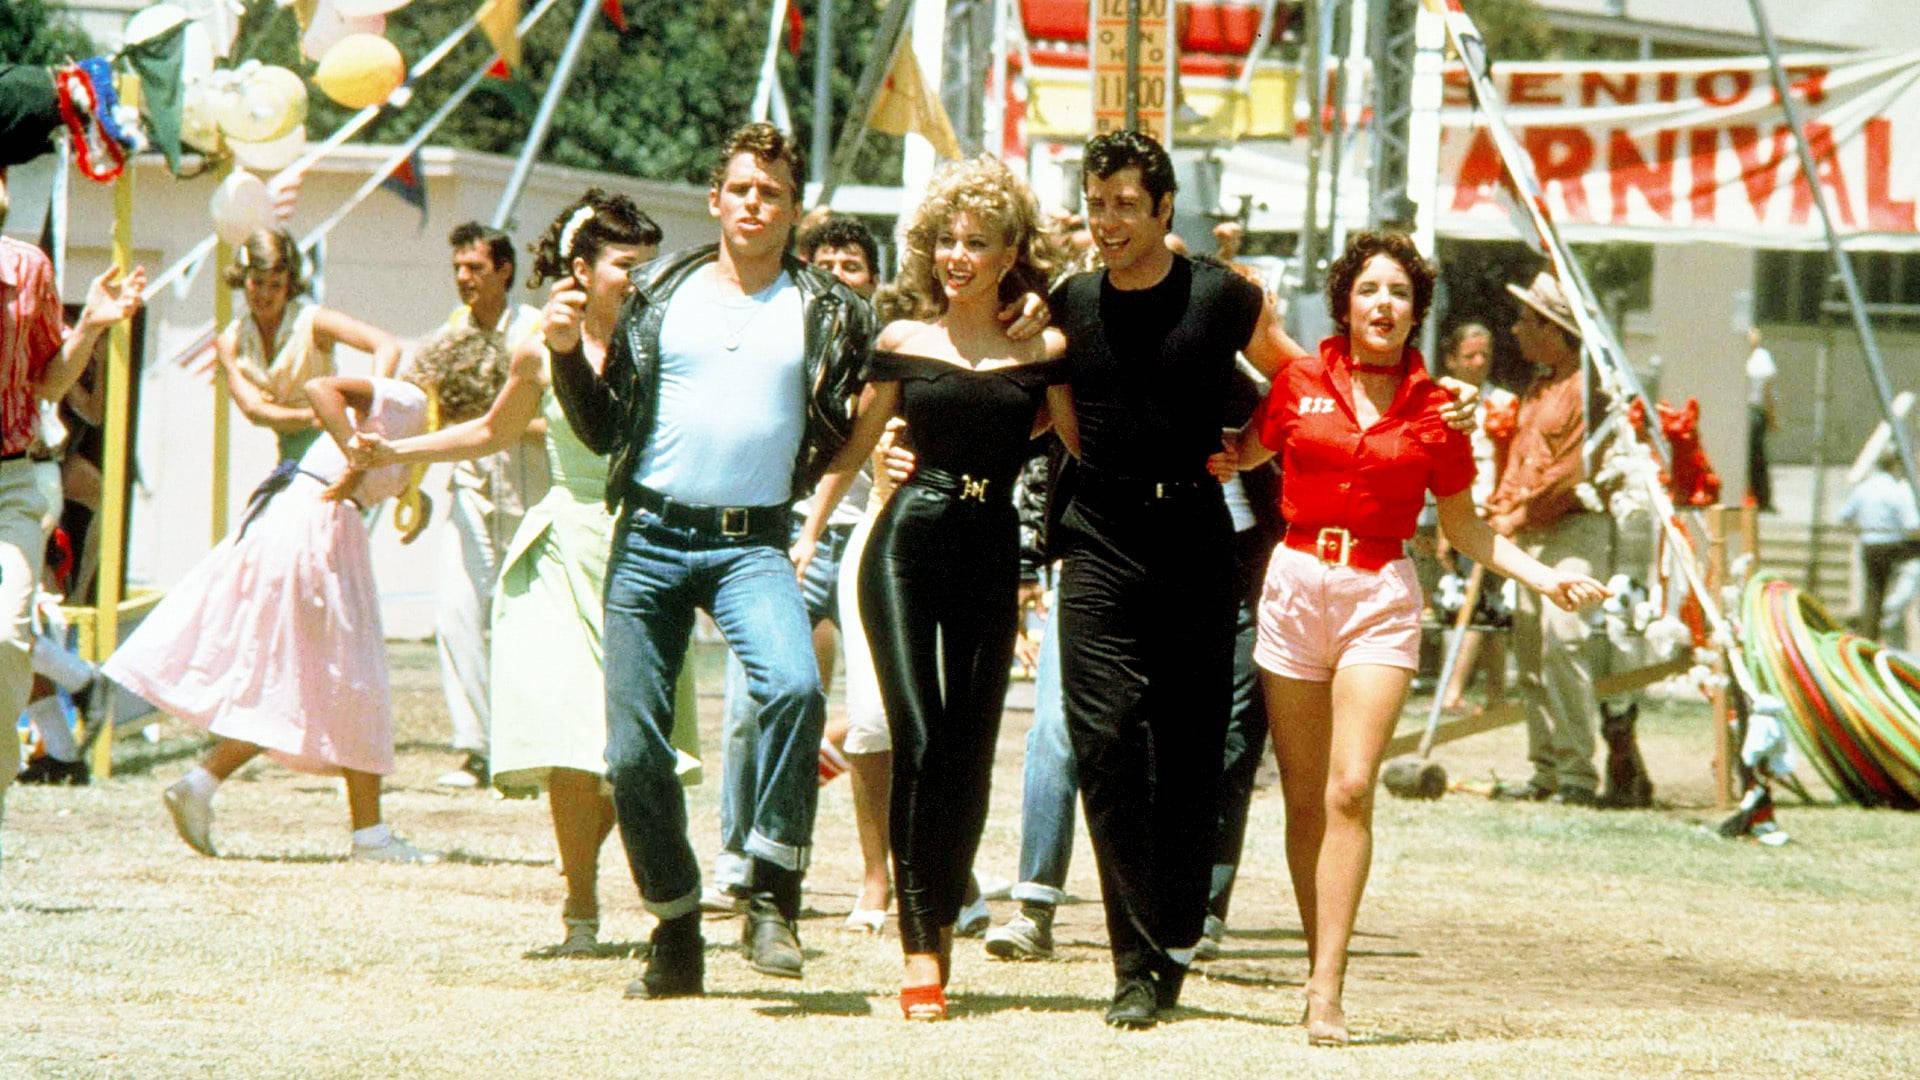 Grease Characters Walking At Carnival Background